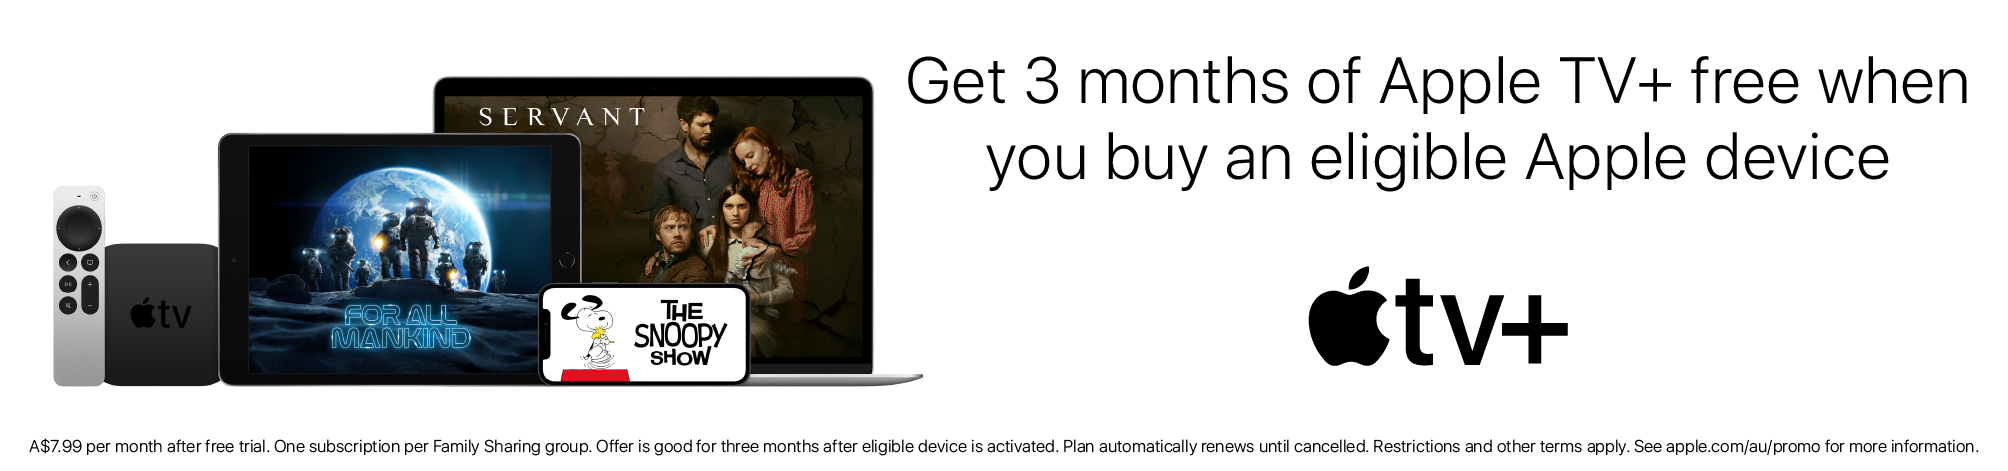 Free 3 Month Apple TV+ Subscription